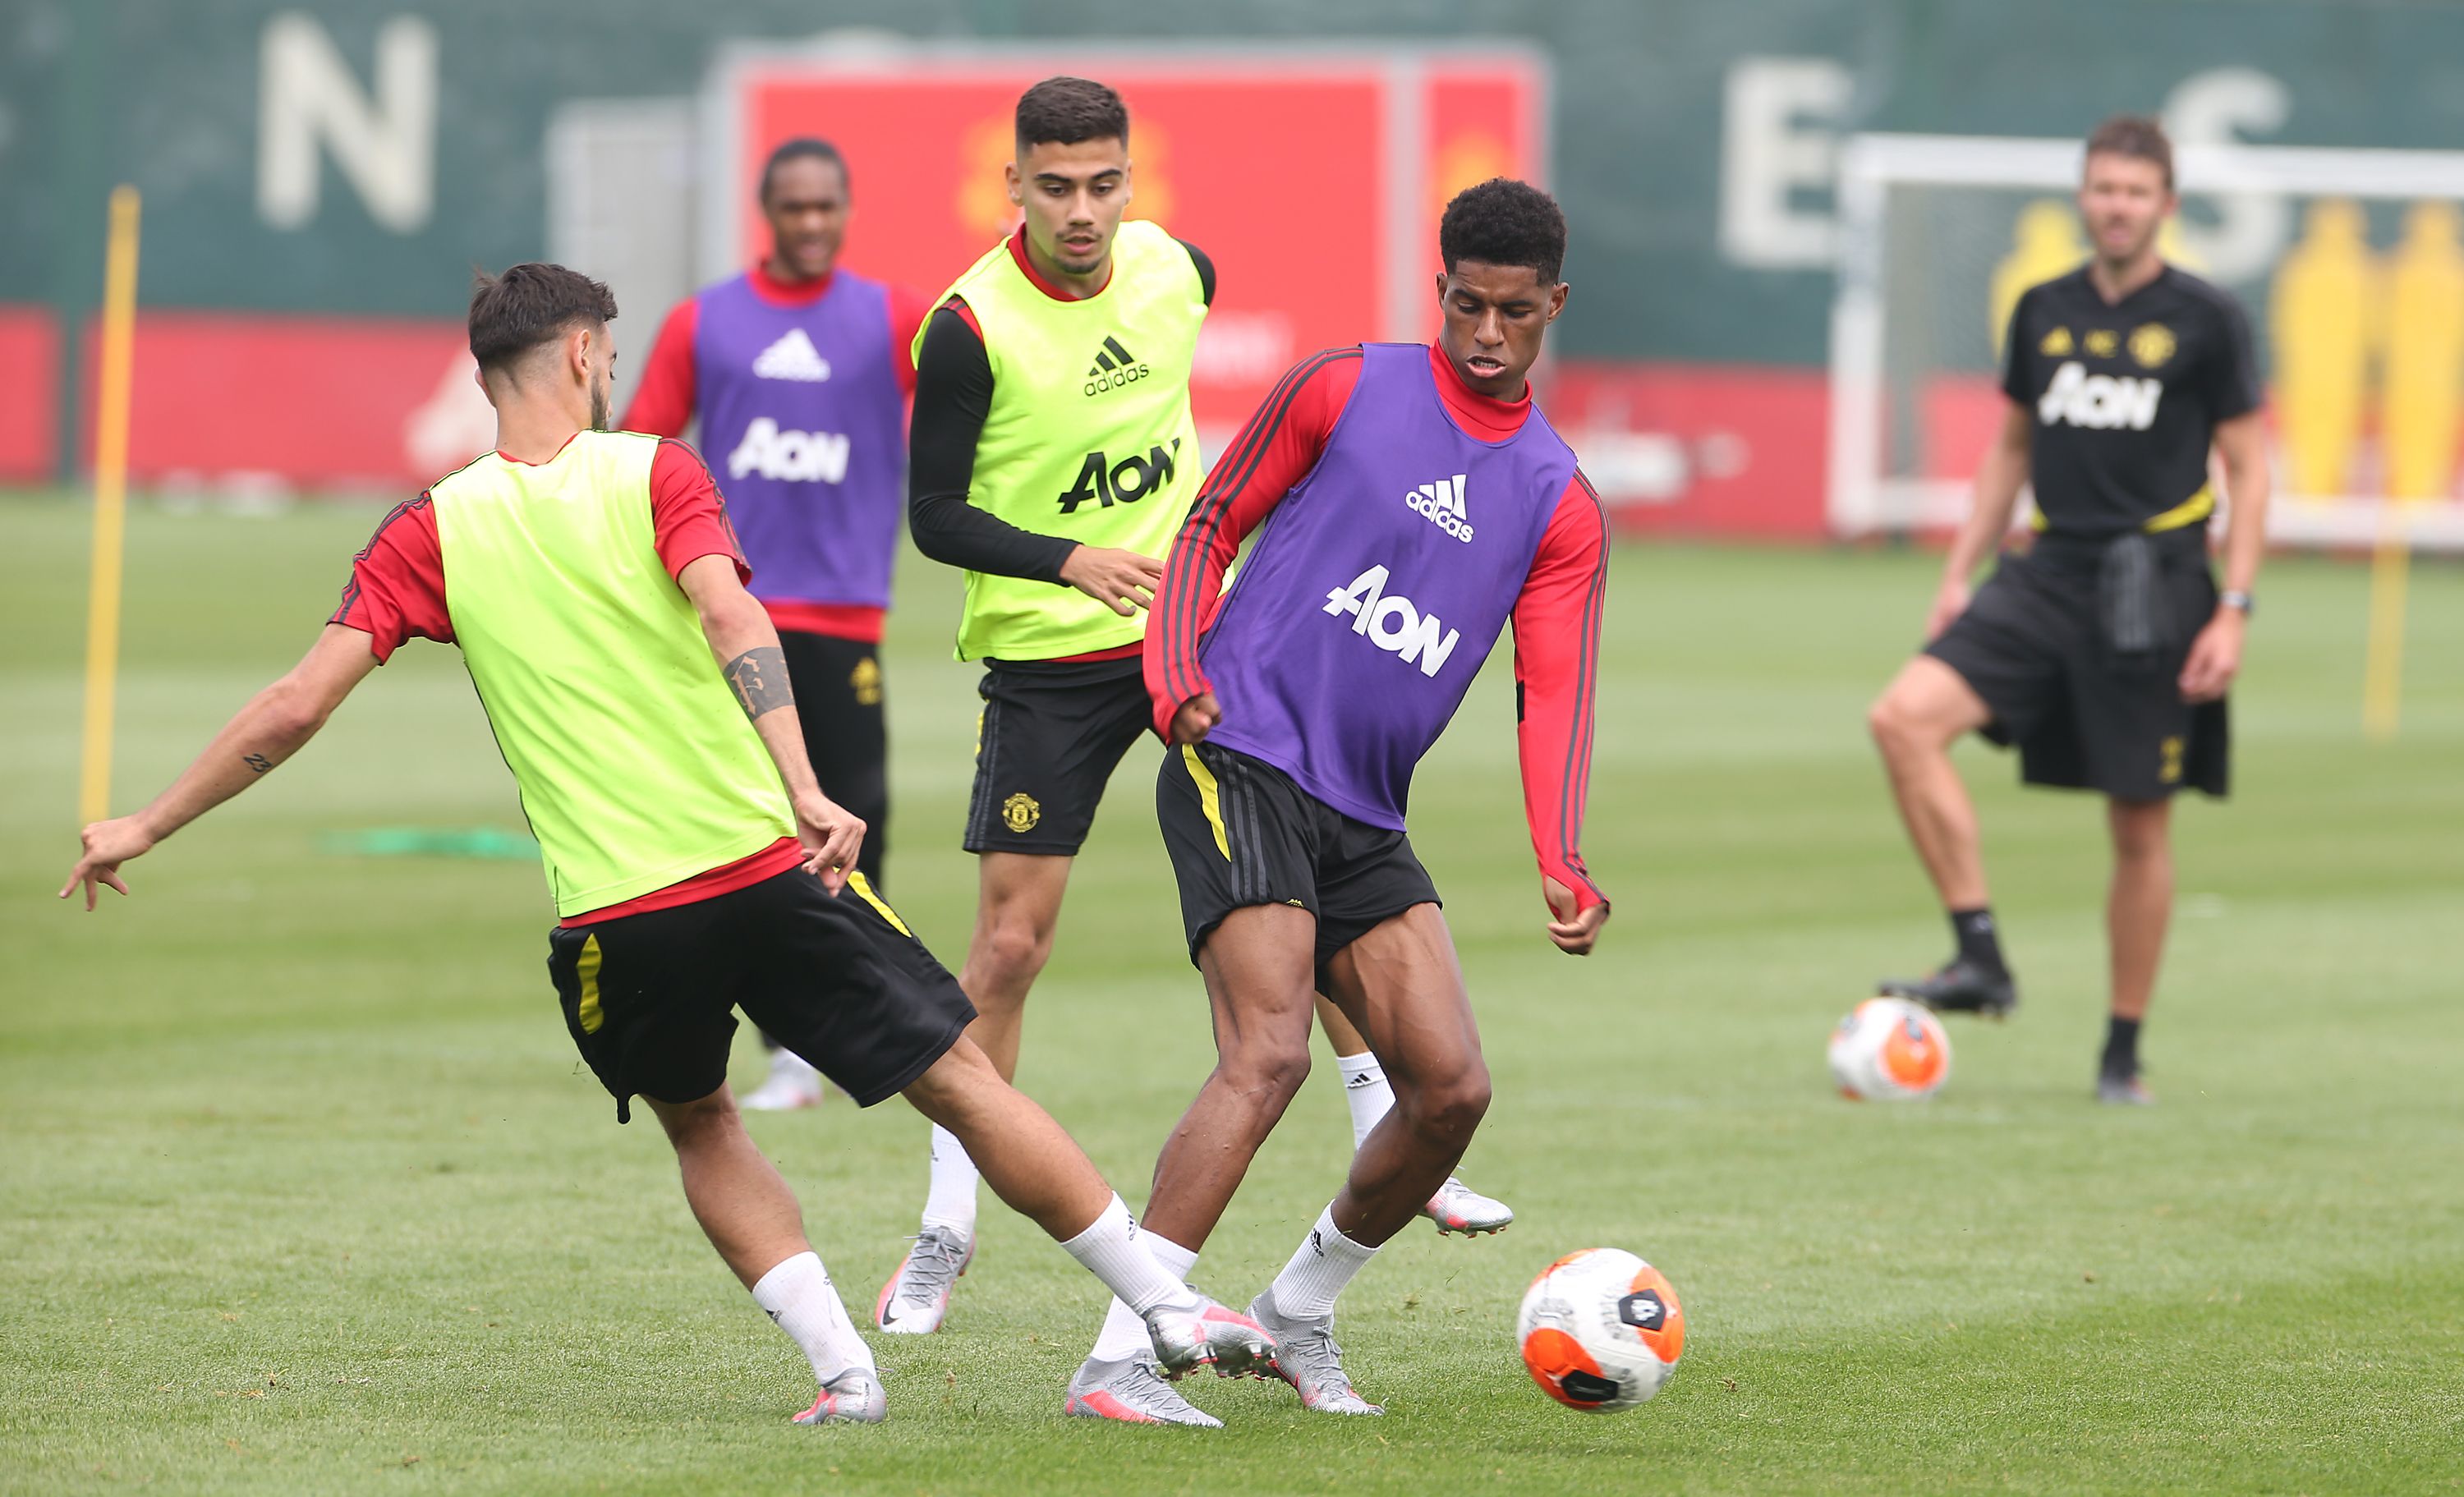 Manchester United practice